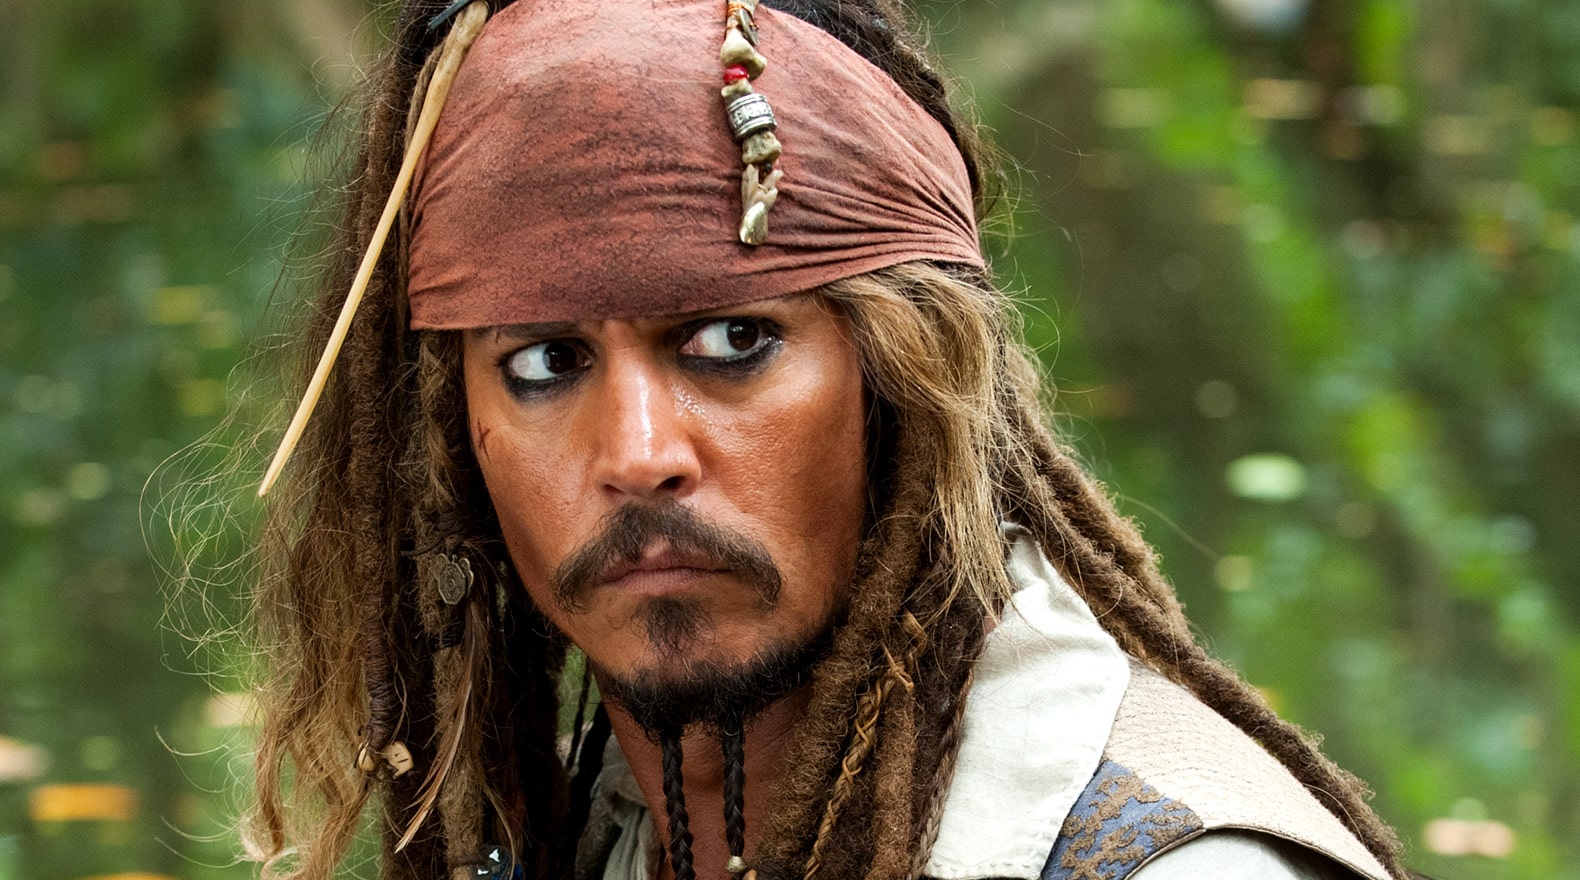 Johnny Depp's journey as Captain Jack Sparrow lasted from 2011 till 2017.